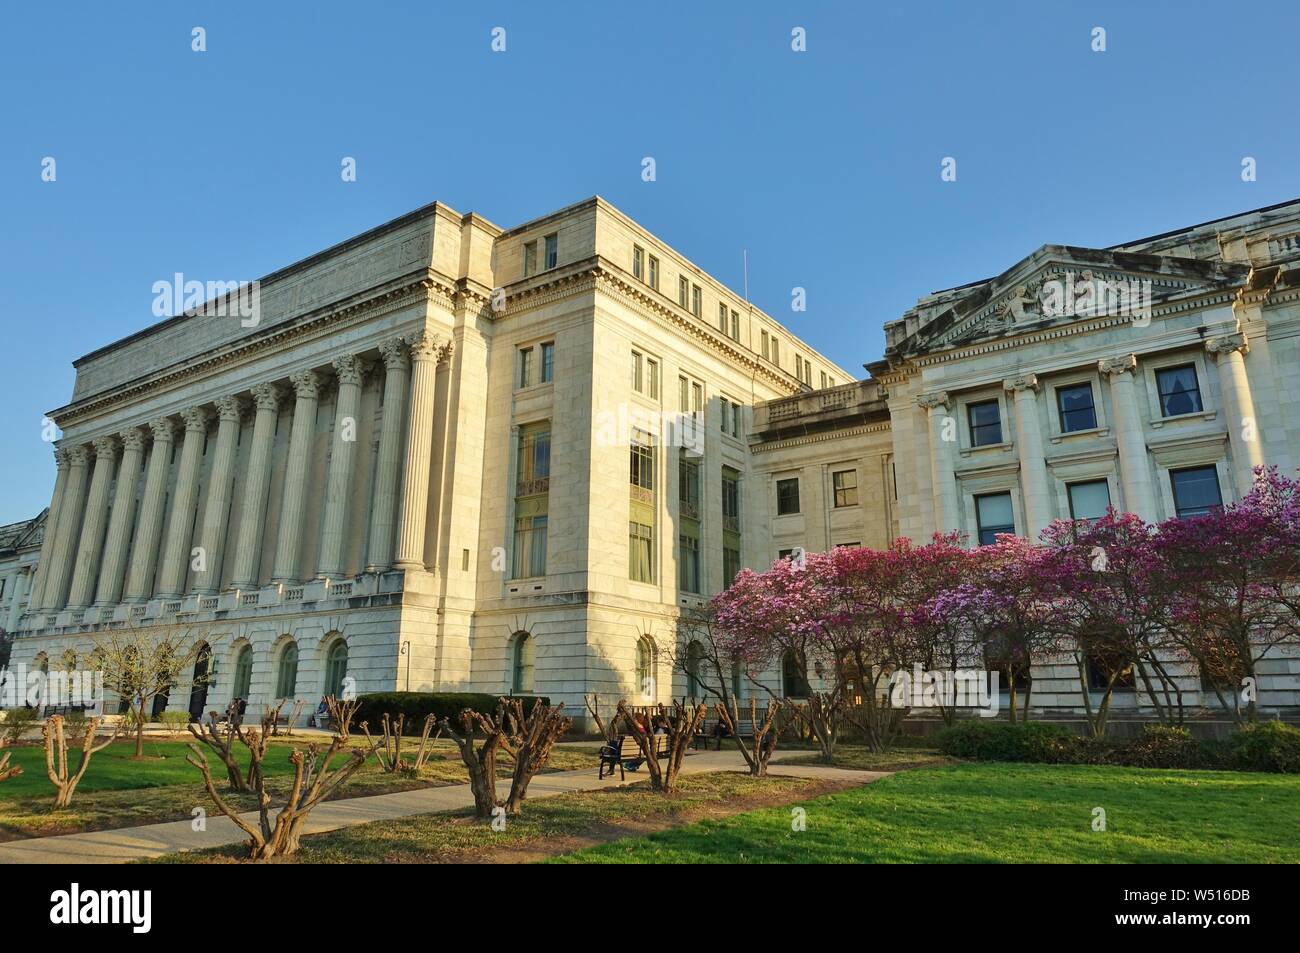 WASHINGTON, DC -4 APR 2019- View of the landmark United States Department of Agriculture (USDA) building (Jamie L. Whitten Building) in Washington, DC Stock Photo